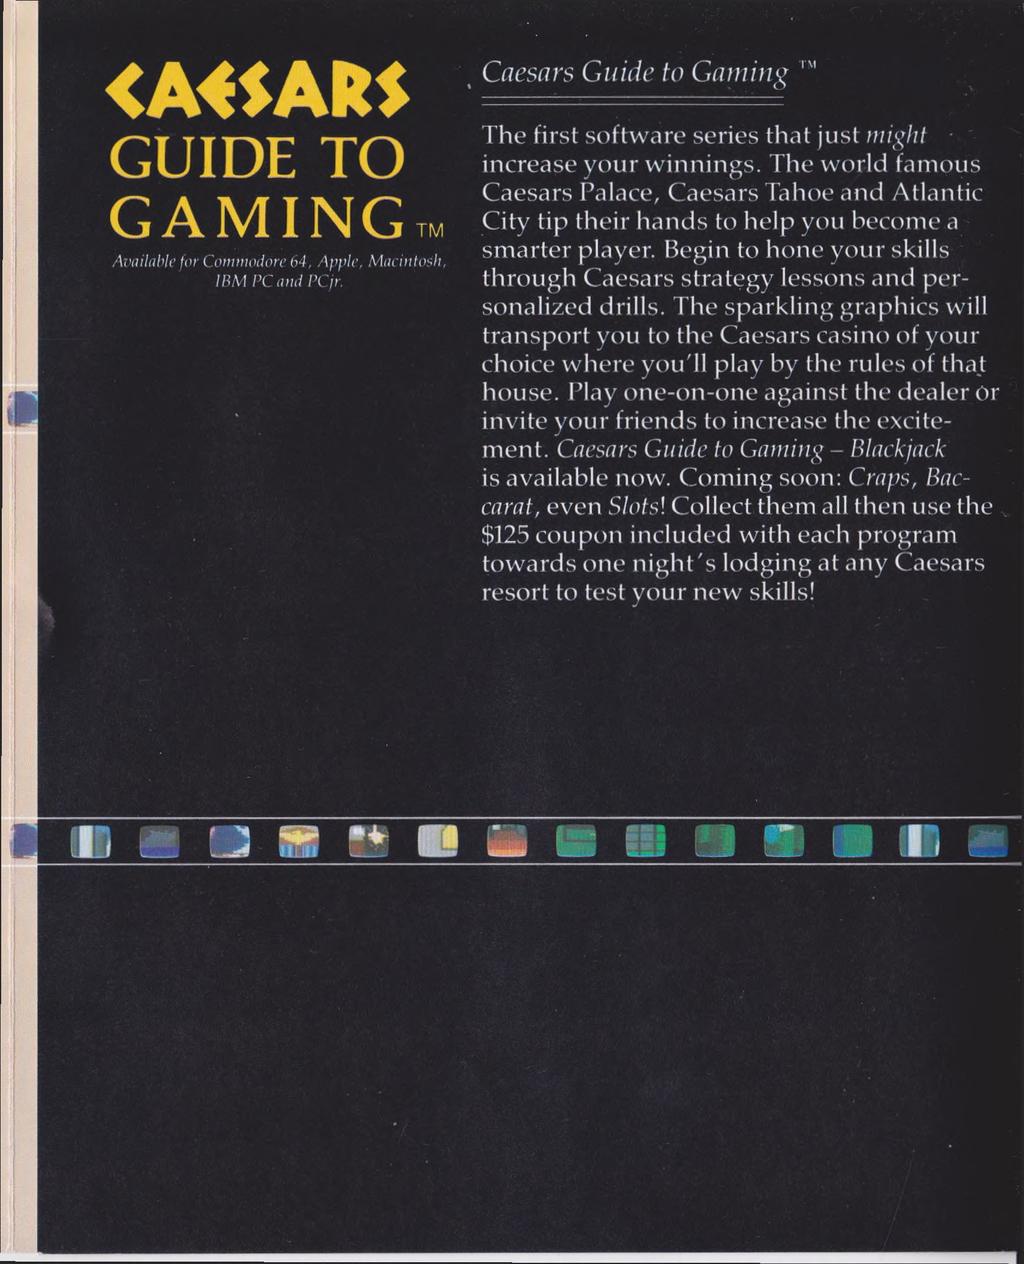 Caesars Guide to Gaming GUIDE TO GAMING Available for Commodore 64, Apple, Macintosh, IBM PC and PCjr. The first software series that just might increase your winnings.